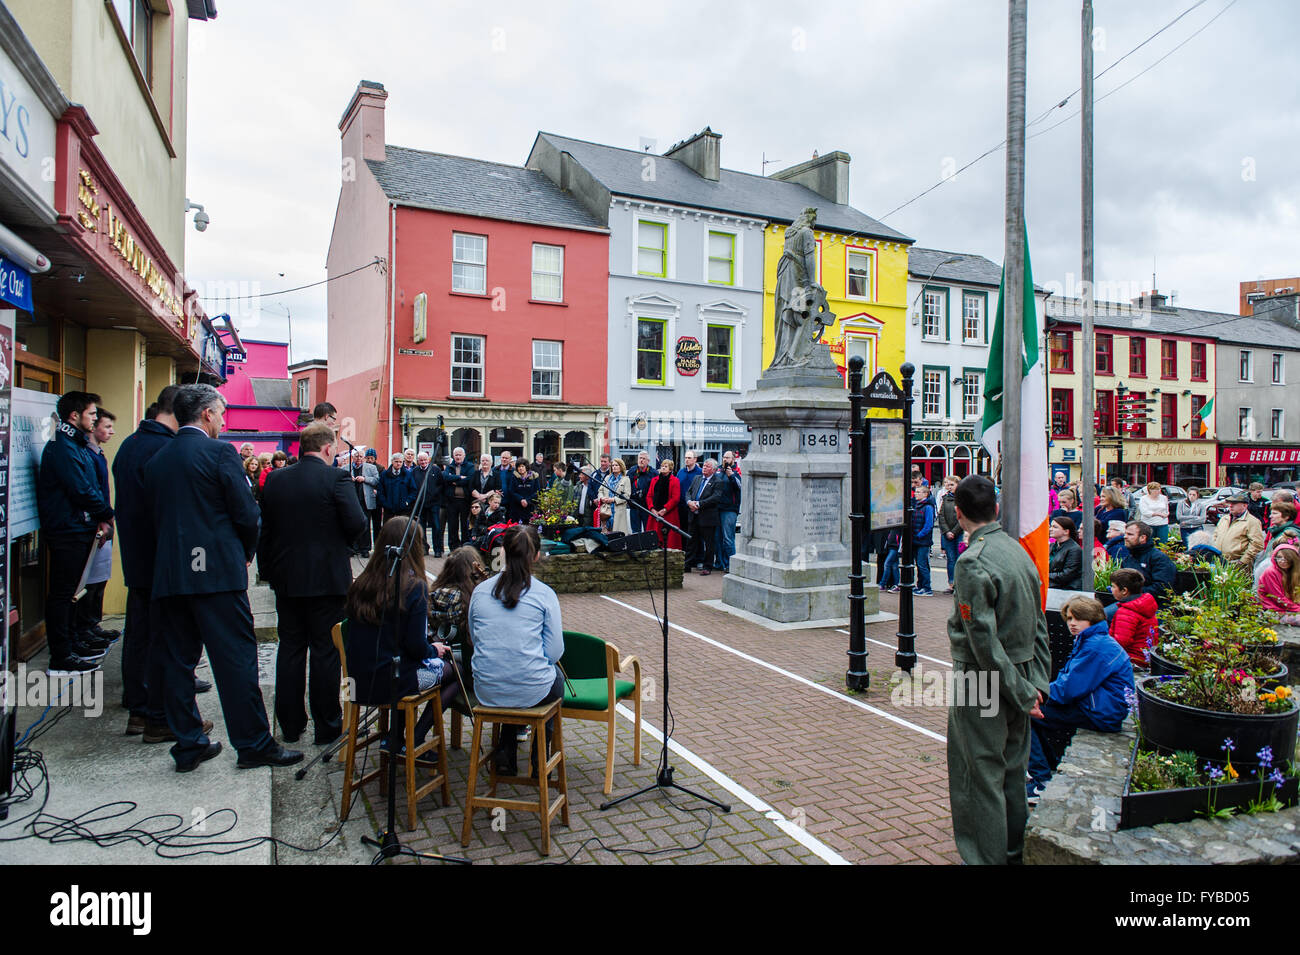 Skibbereen, Ireland. 24th April, 2016. The crowd of approximately 200 listen intently to Mercy Heights School pupil, James O'Sullivan's powerful version of the oration that was read over O'Donovan Rossa's grave by Padraig Pearse at O'Donovan Rossa's funeral in 1915. The reading was part of the school's Proclamation Day event to commemorate 100 years since the start of the rebellion in Dublin. Credit: Andy Gibson/Alamy Live News Stock Photo